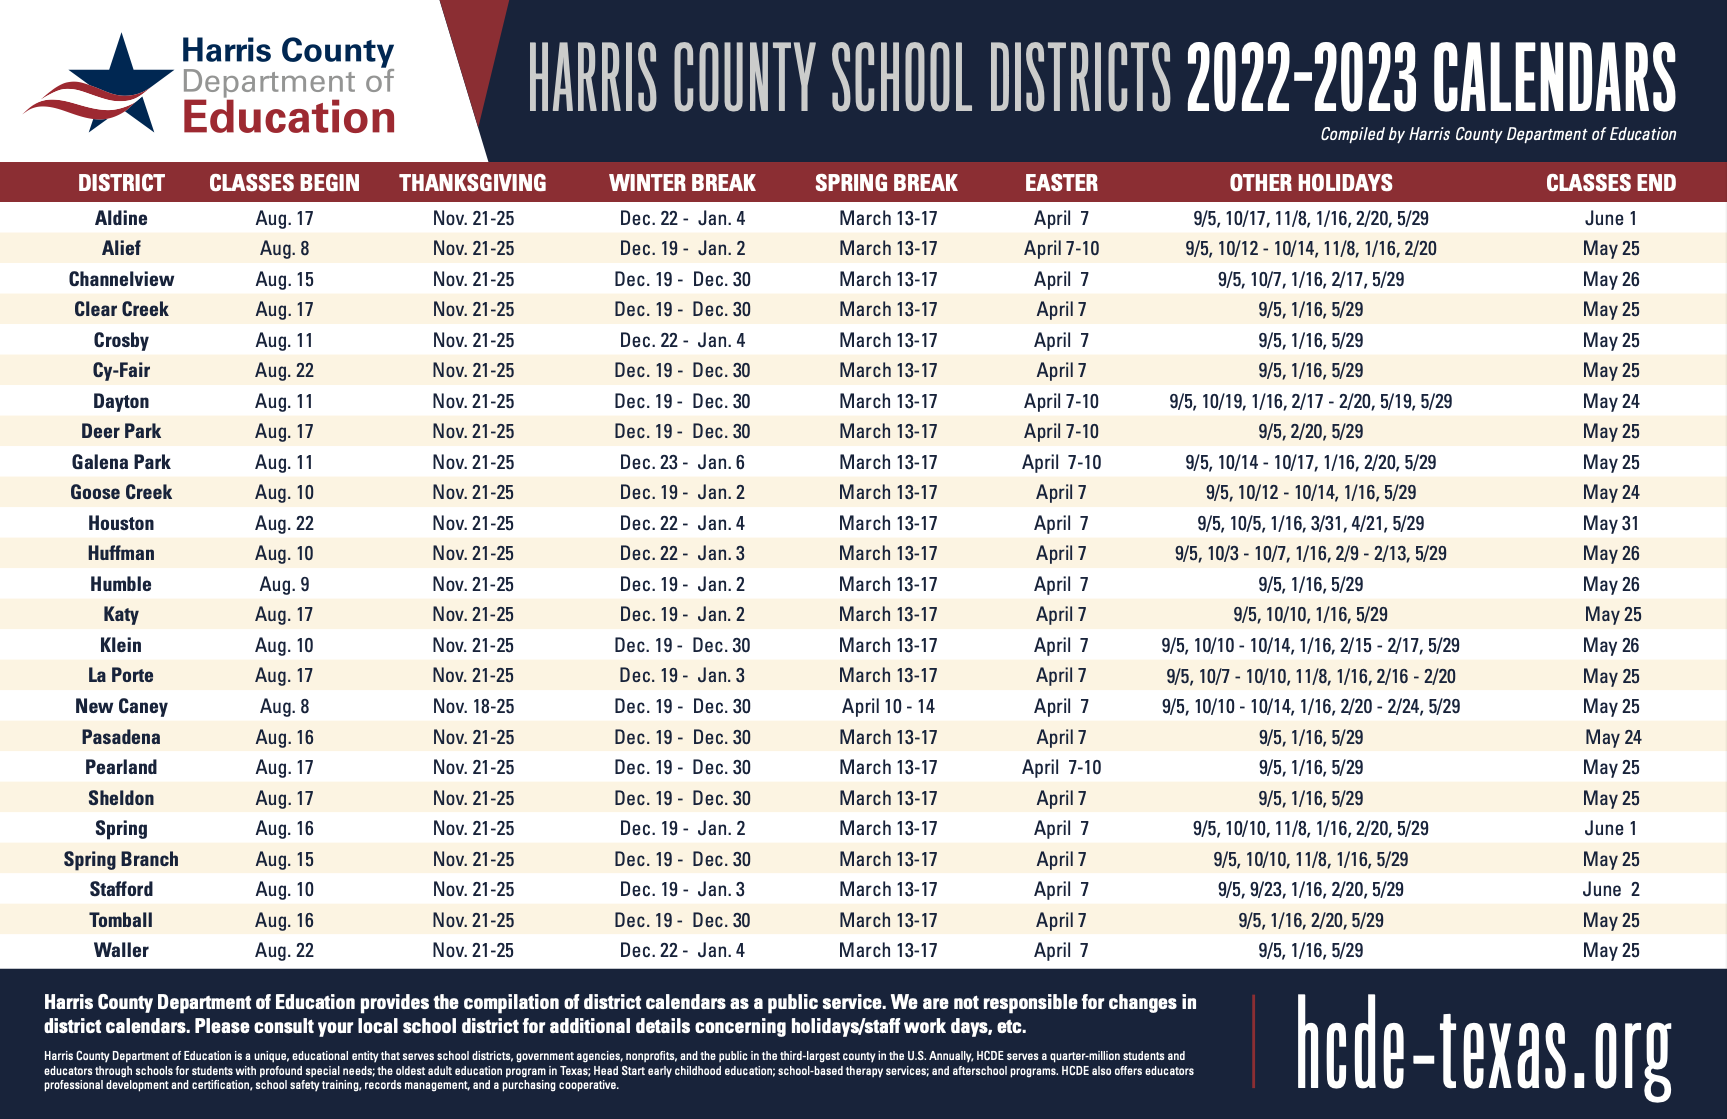 hcde-releases-2022-2023-comprehensive-school-calendar-for-25-harris-county-districts-houston